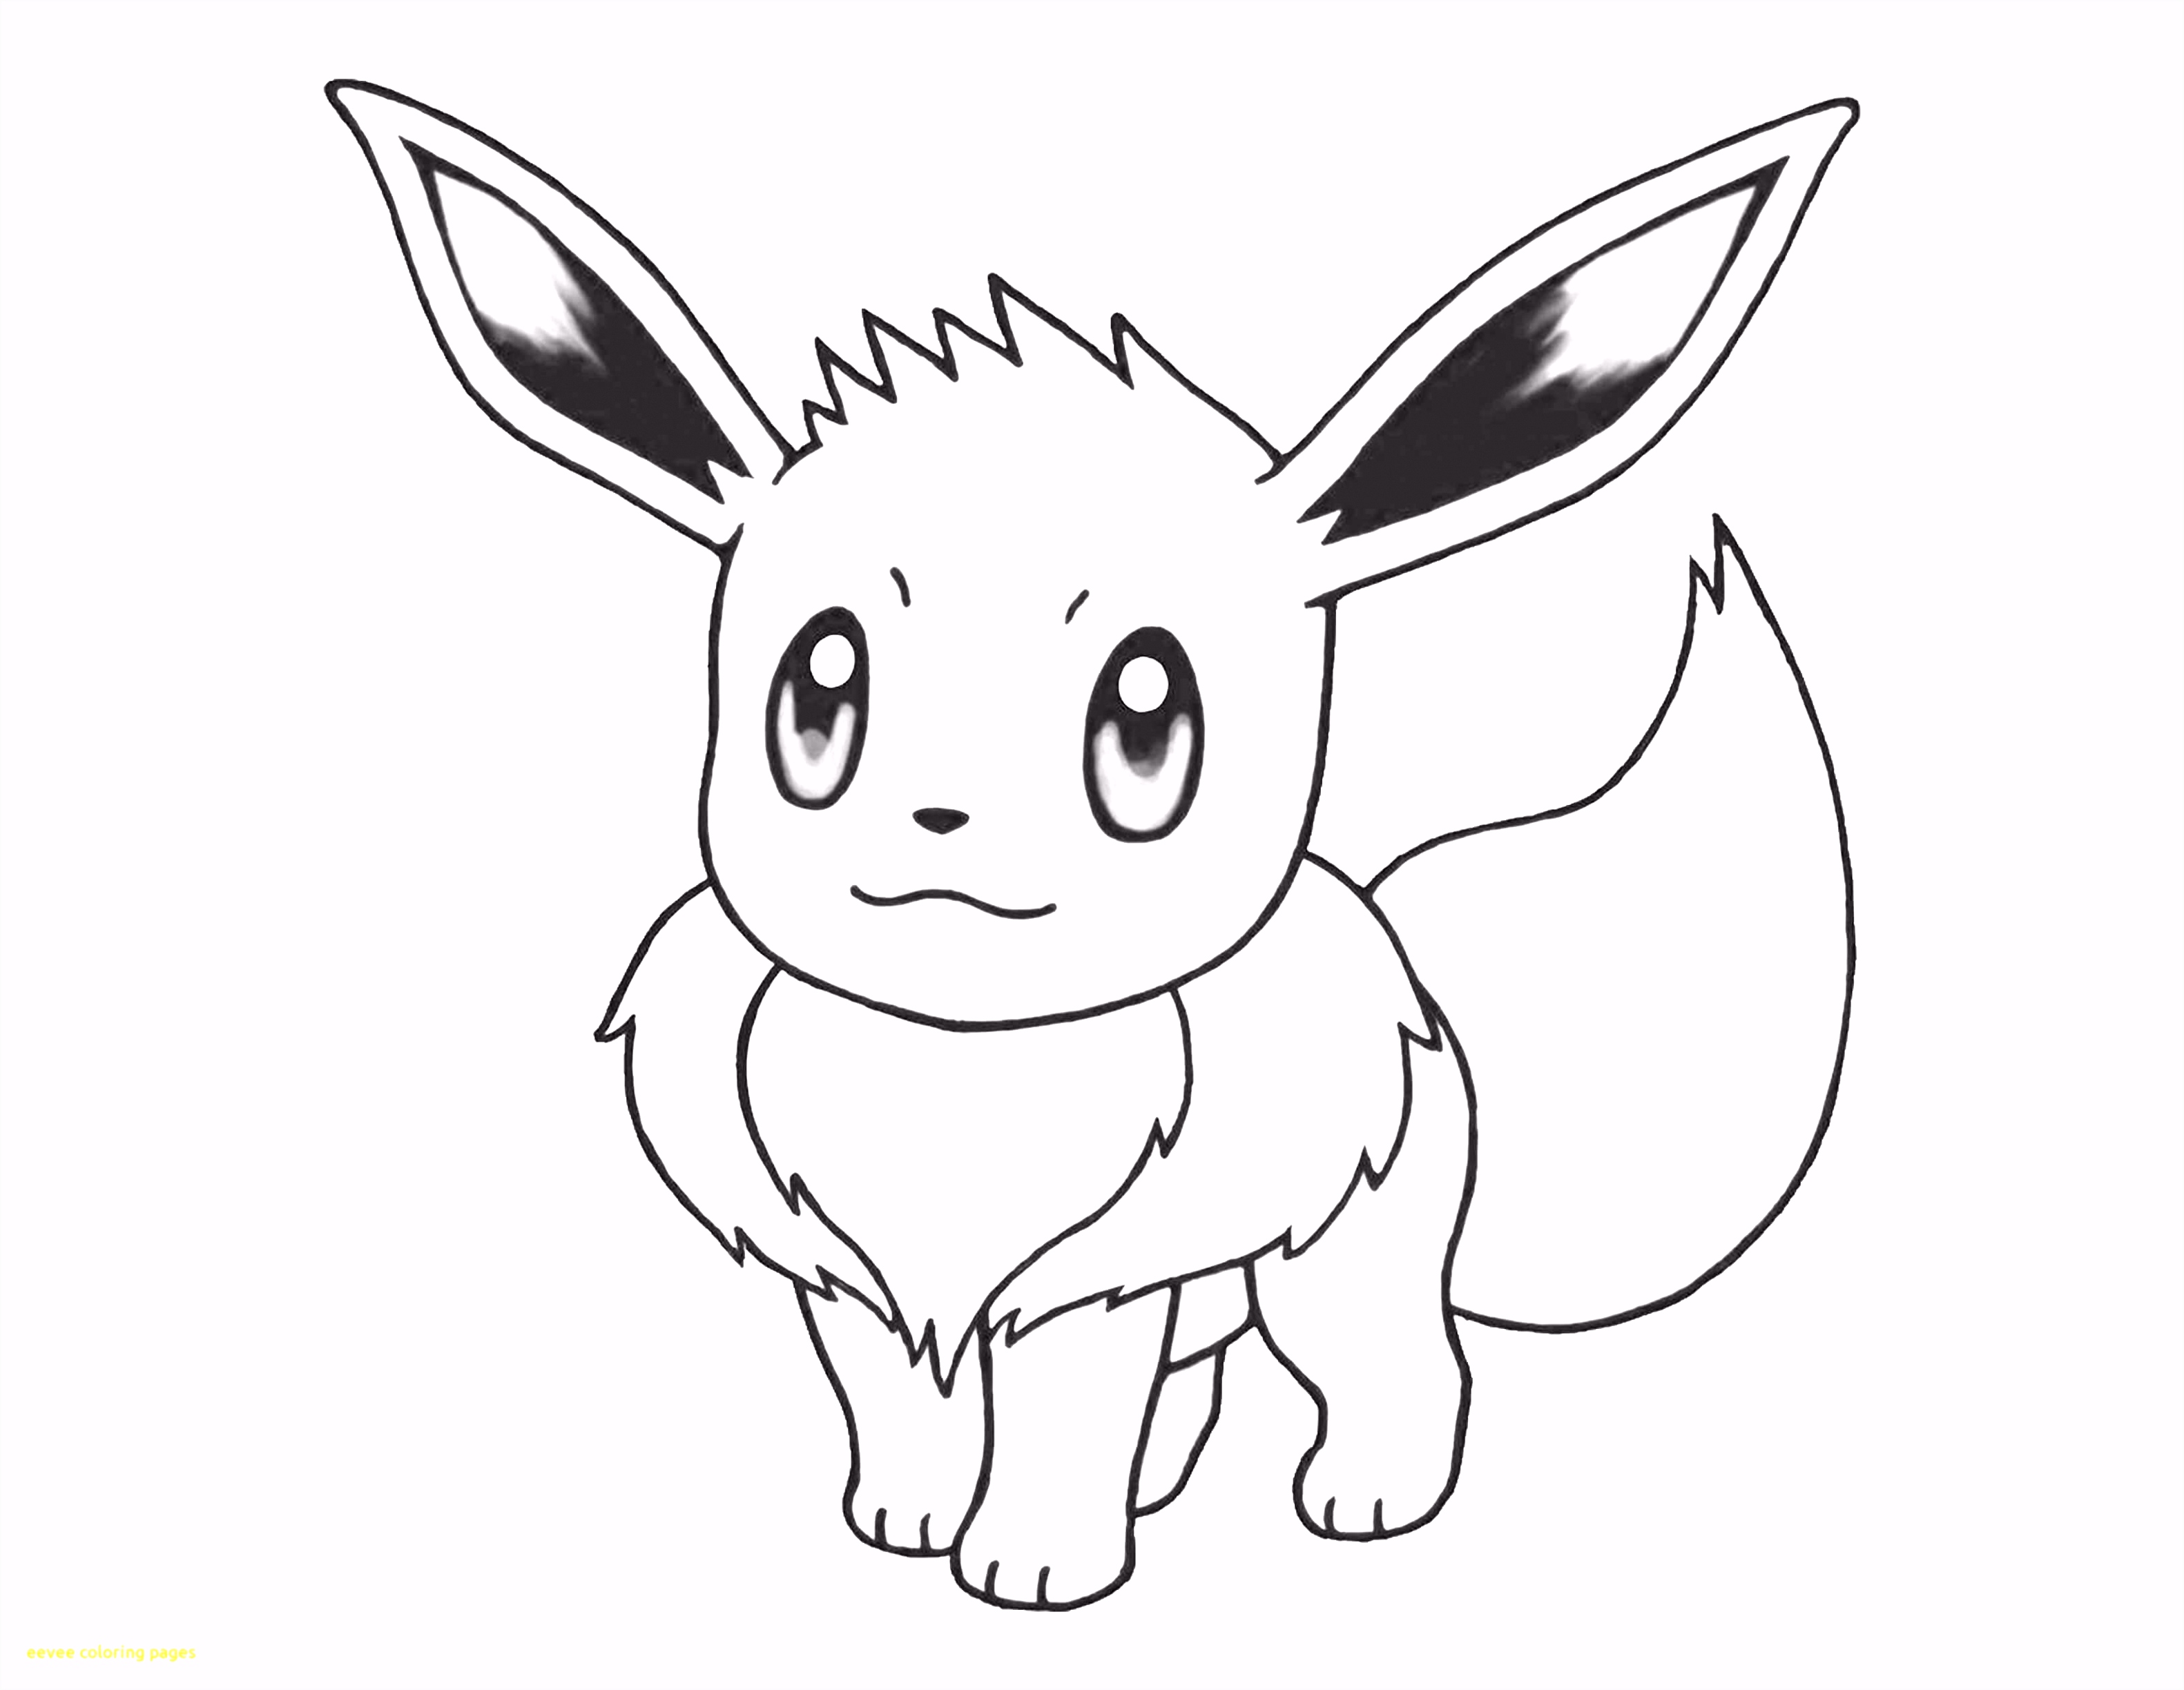 Pokemon Eevee Coloring Pages Category Coloring Pages 84 Coloring